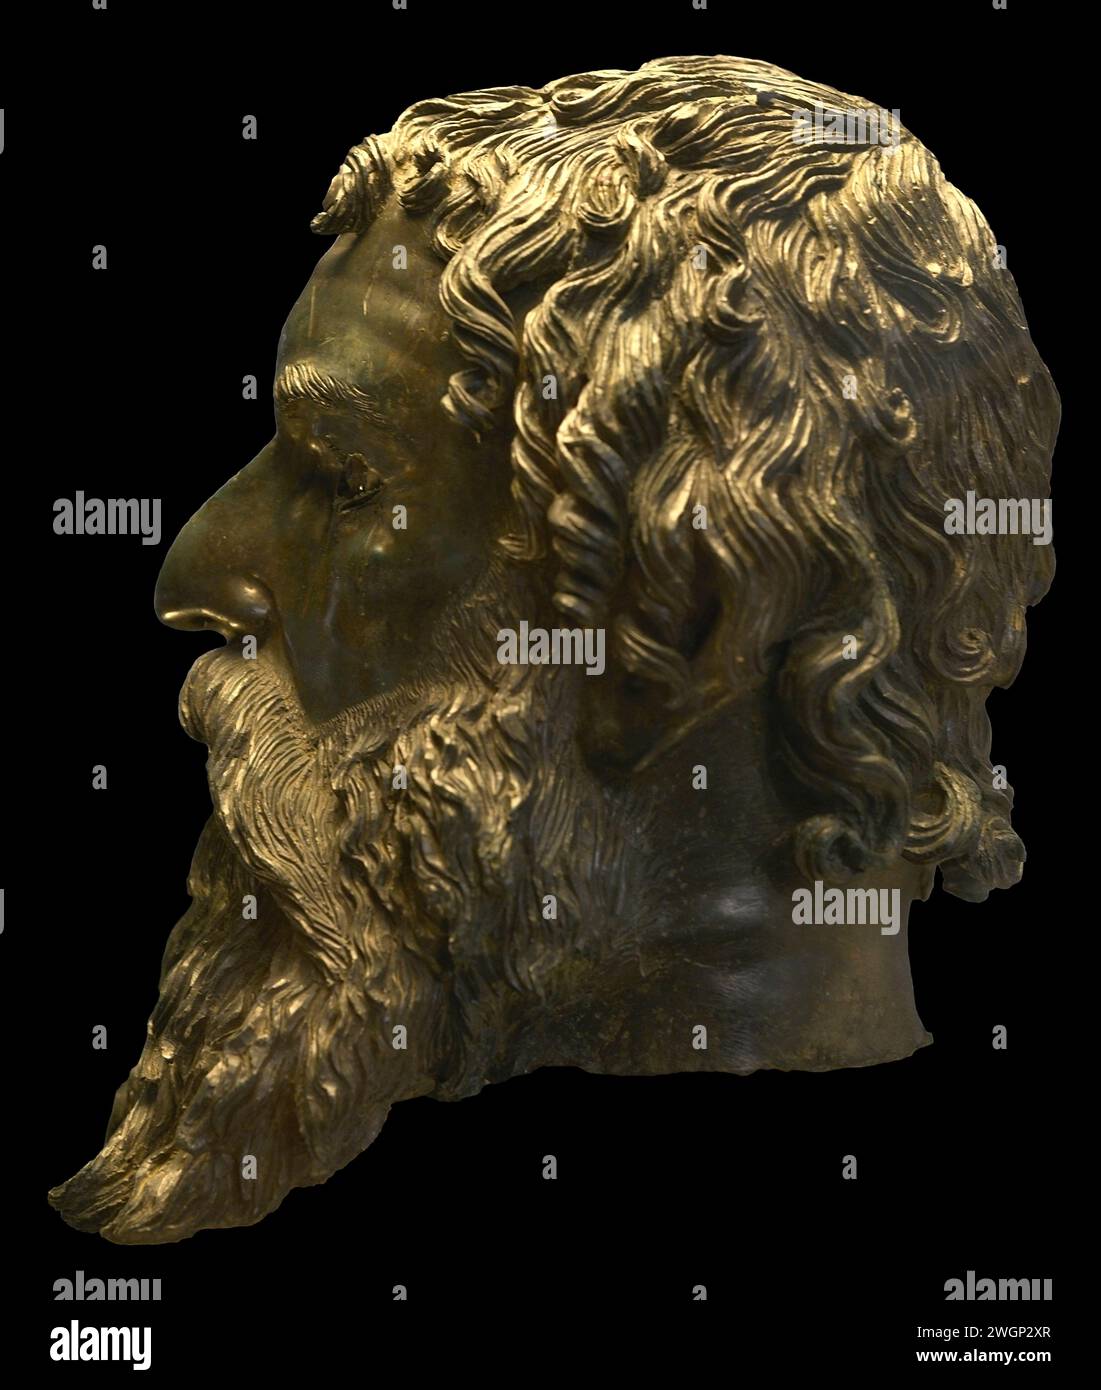 Seuthes III. King of Odrysia between 324 BC and 312 BC. Head of Seuthes III made of bronze, copper, alabaster and glass paste. Dated to the last decade of the 3rd century BC. From the tomb at Golyama Kosmatka Tumulus, Shipka, Kazanlak region, Bulgaria. National Archaeological Museum. Sofia. Bulgaria. Stock Photo